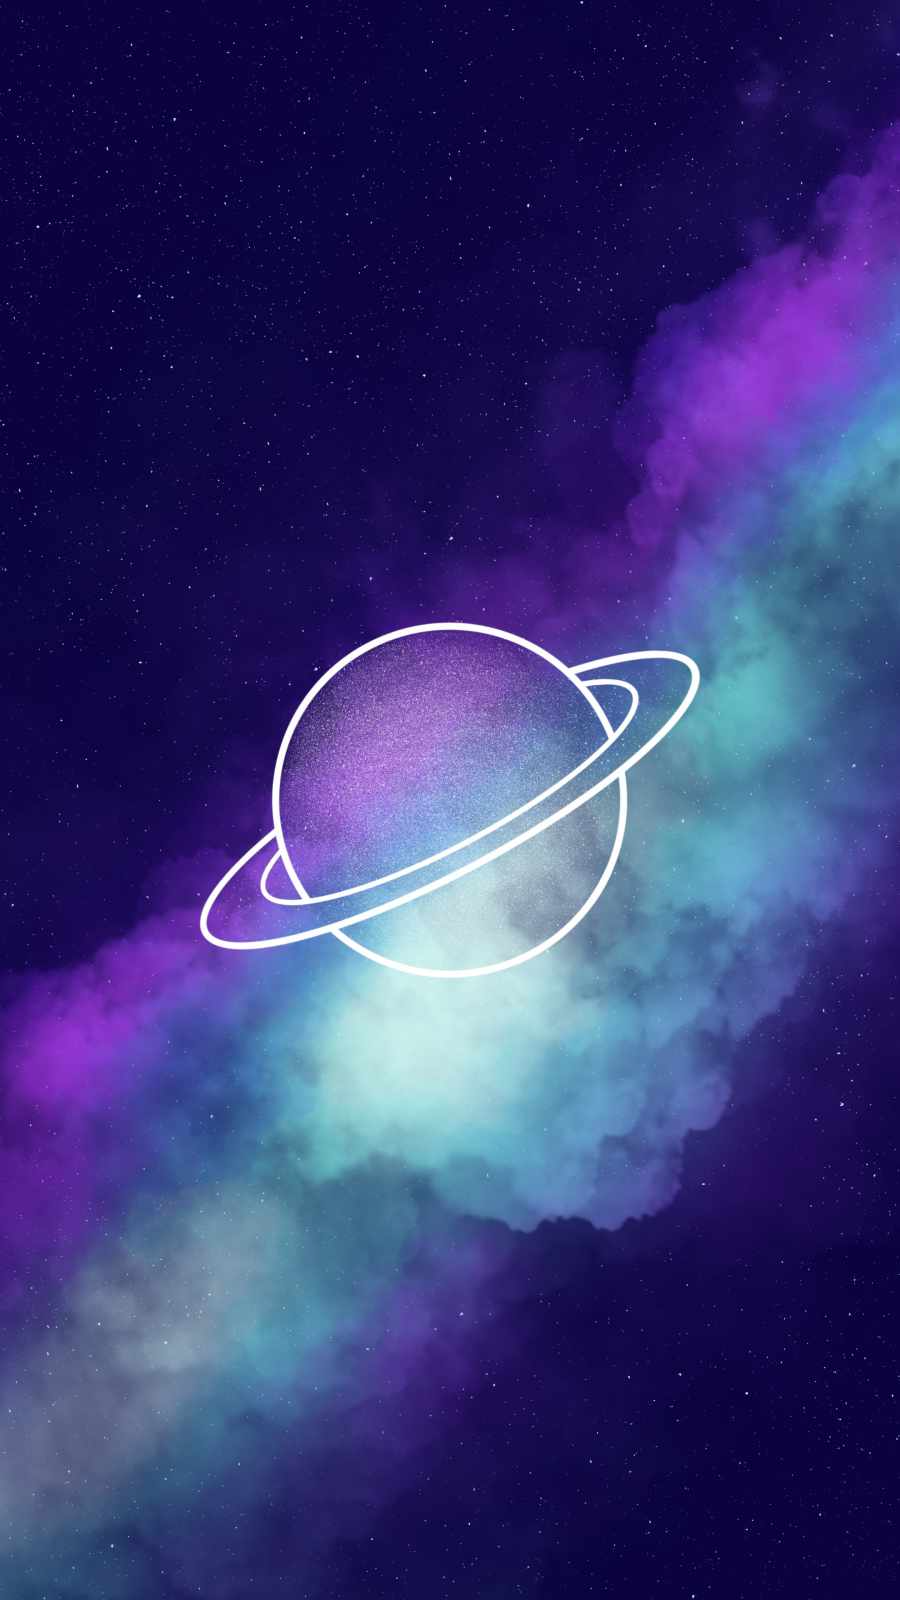 1080x1920  1080x1920 galaxy digital universe space science fiction hd  for Iphone 6 7 8 wallpaper  Coolwallpapersme